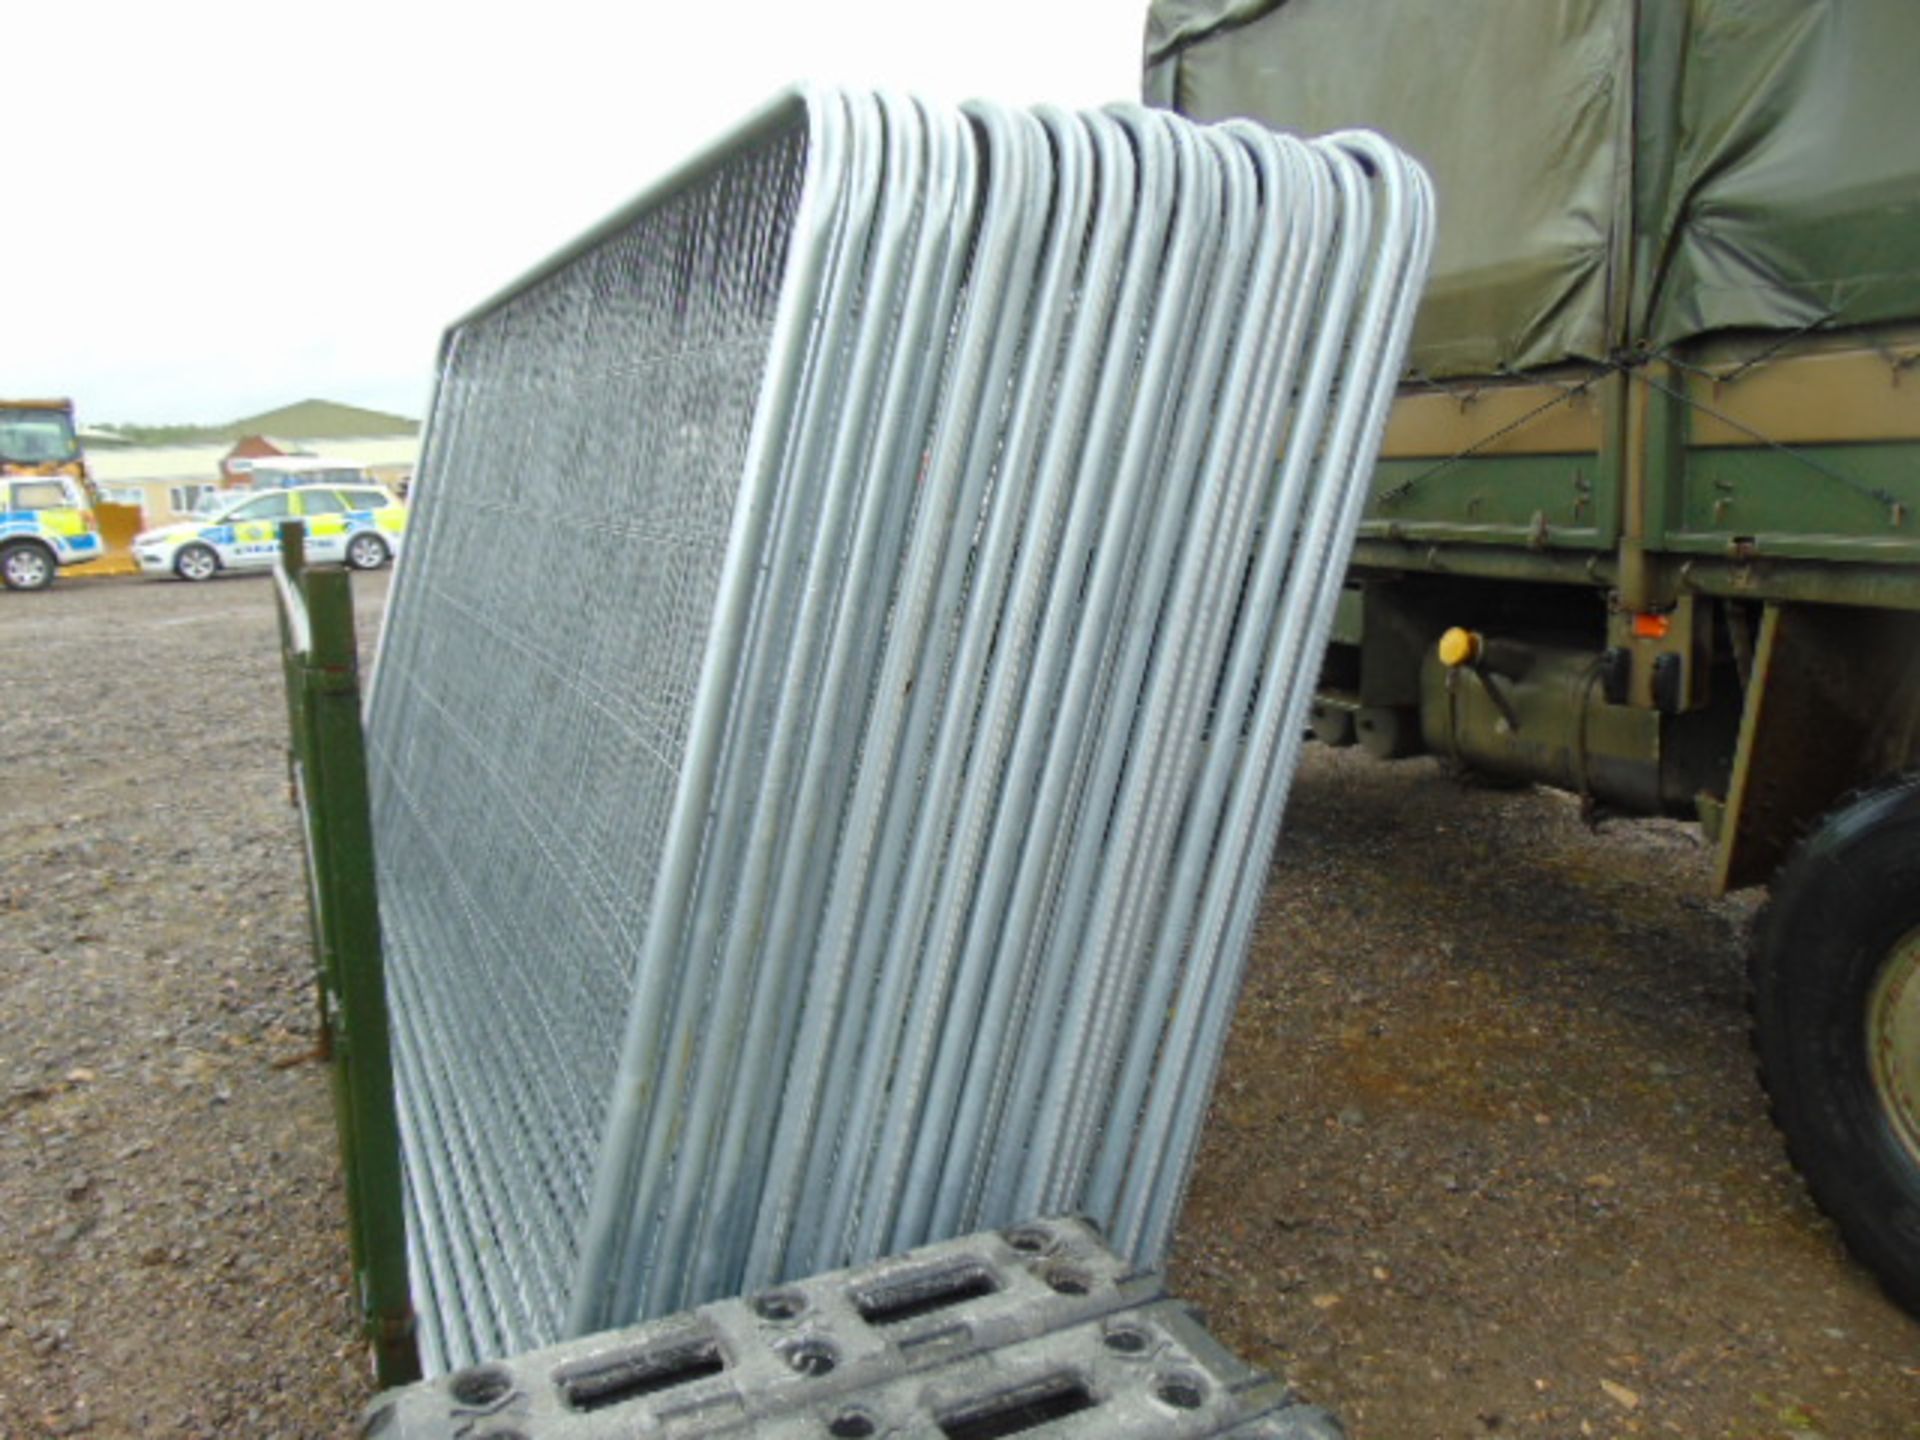 20 x Temporary Heras Security Fence Panels, 20 x Rubber Block Feet and 20 x Anti Tamper Couplers - Image 4 of 7